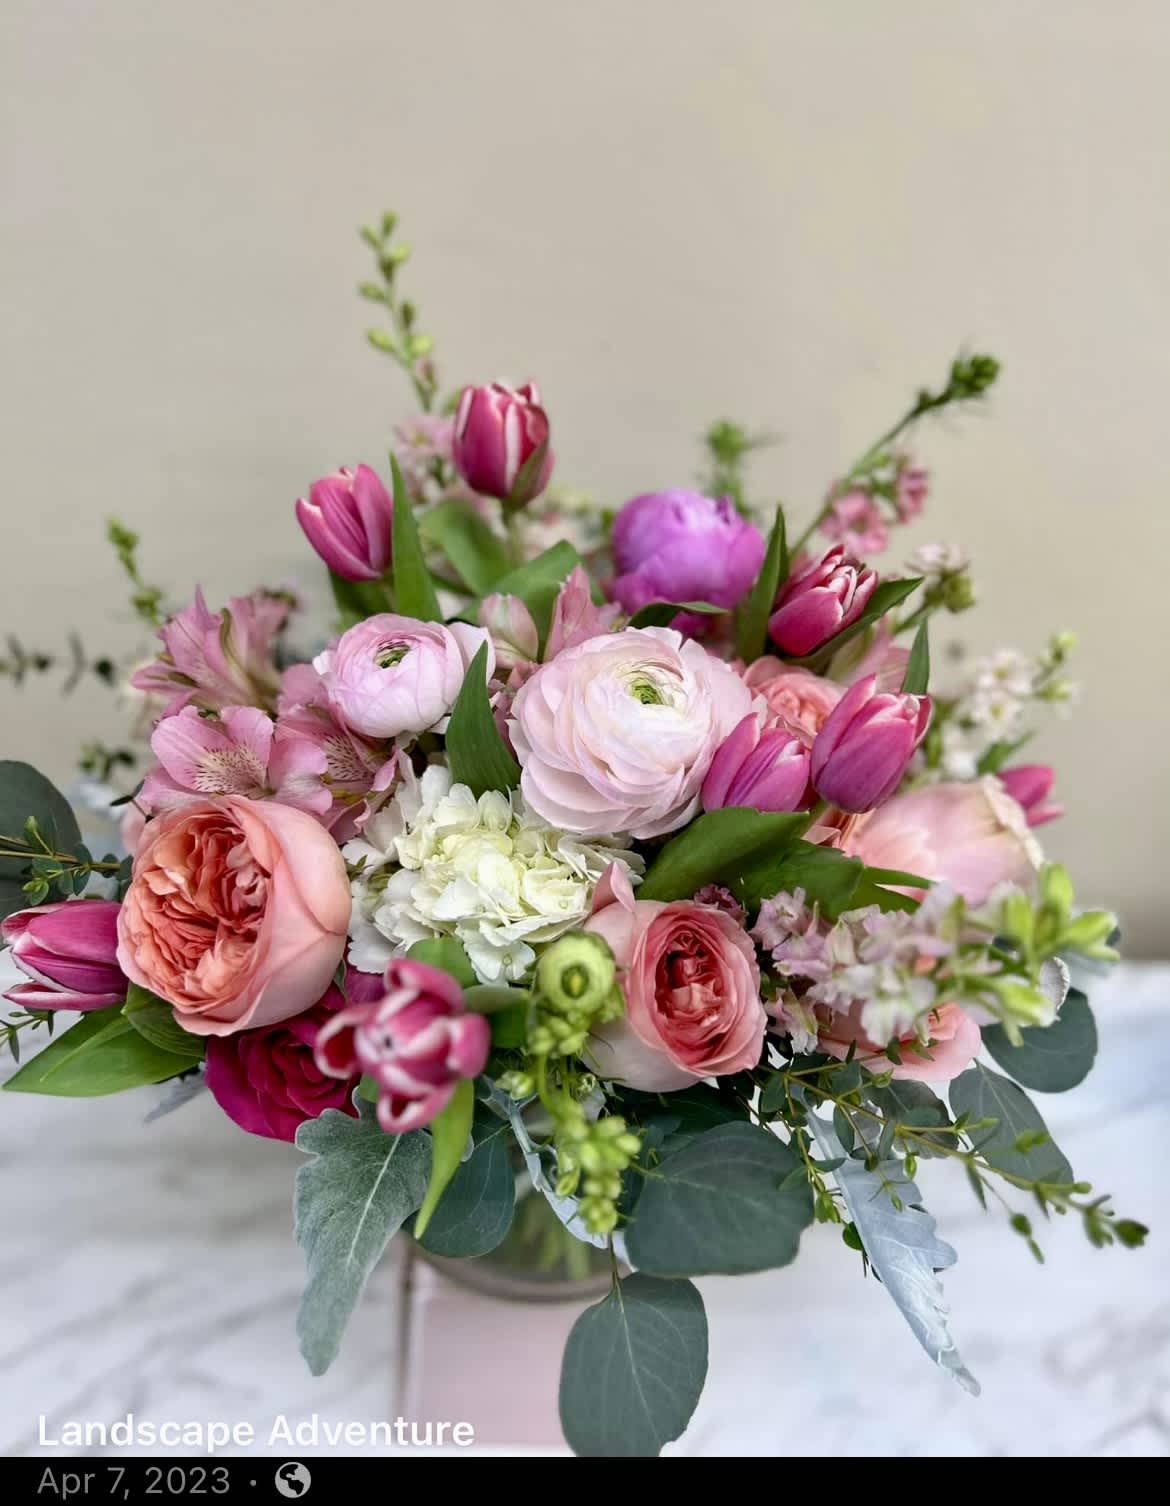 Gardening mix shades of all pink - Roses, tulips eucalyptus All different shades of pink and spring flowers